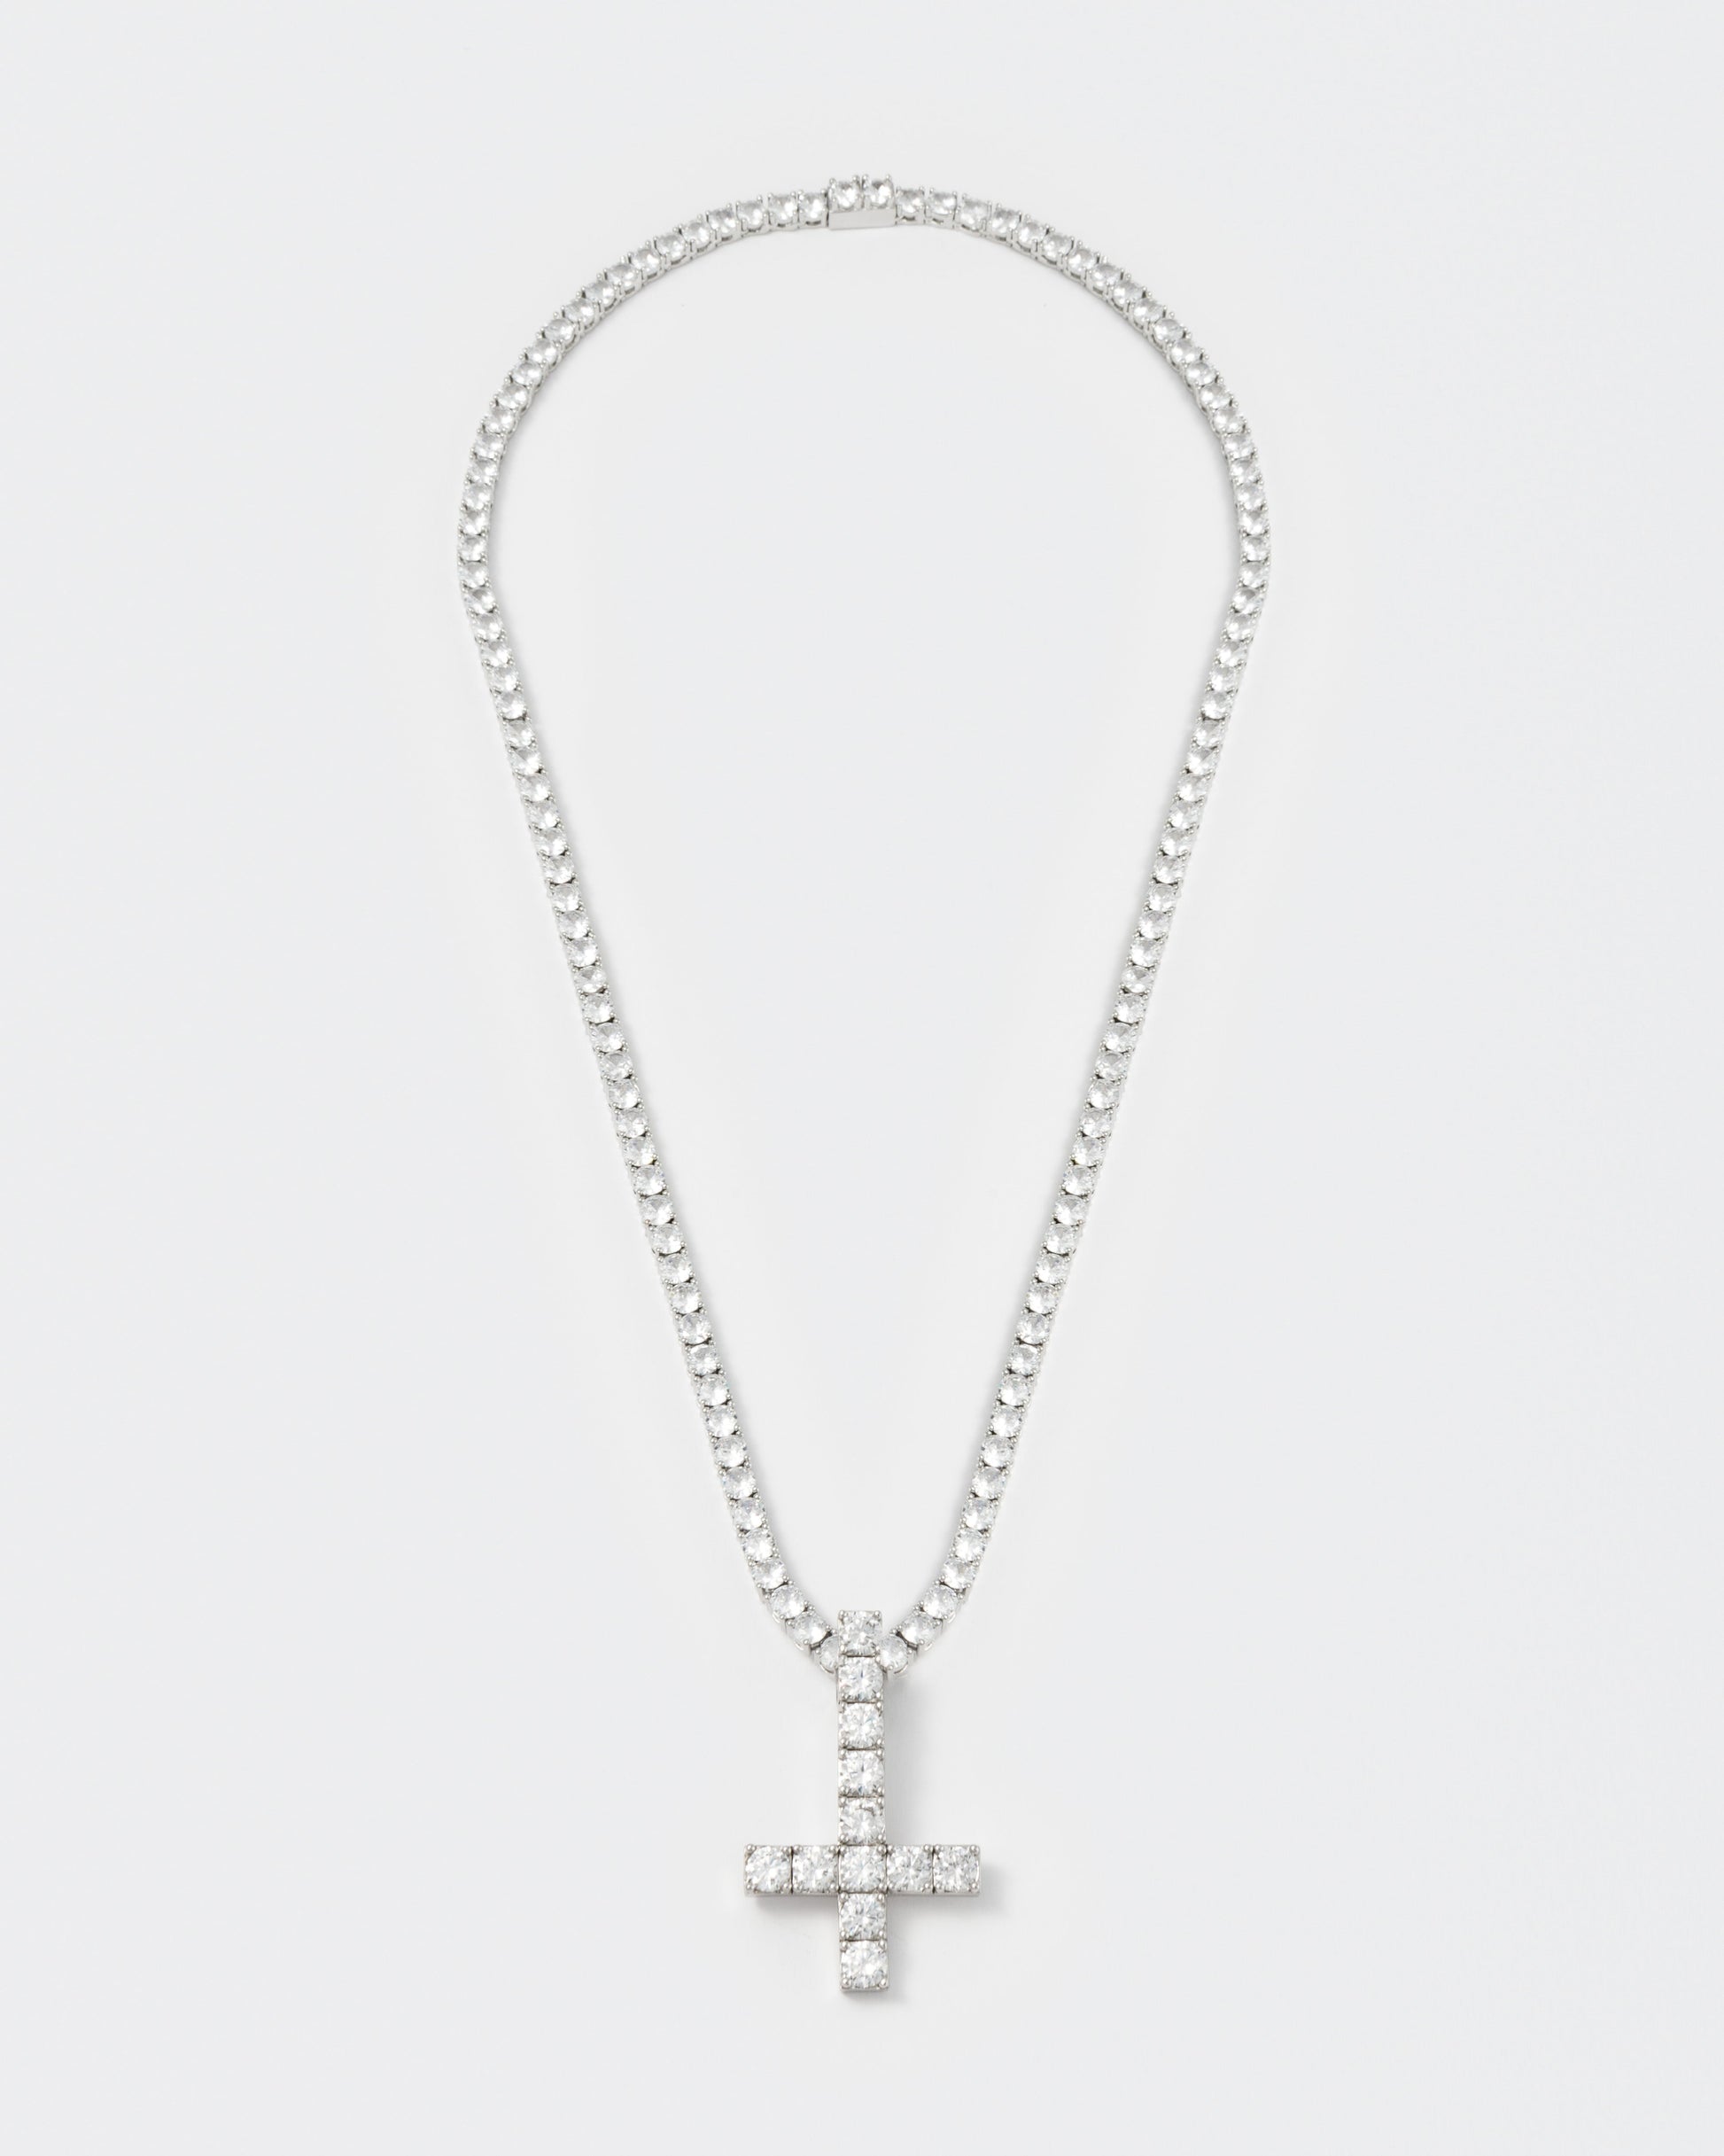 detail of 18k white gold coated reversed cross pendant necklace with hand-set stones in white and tennis chain